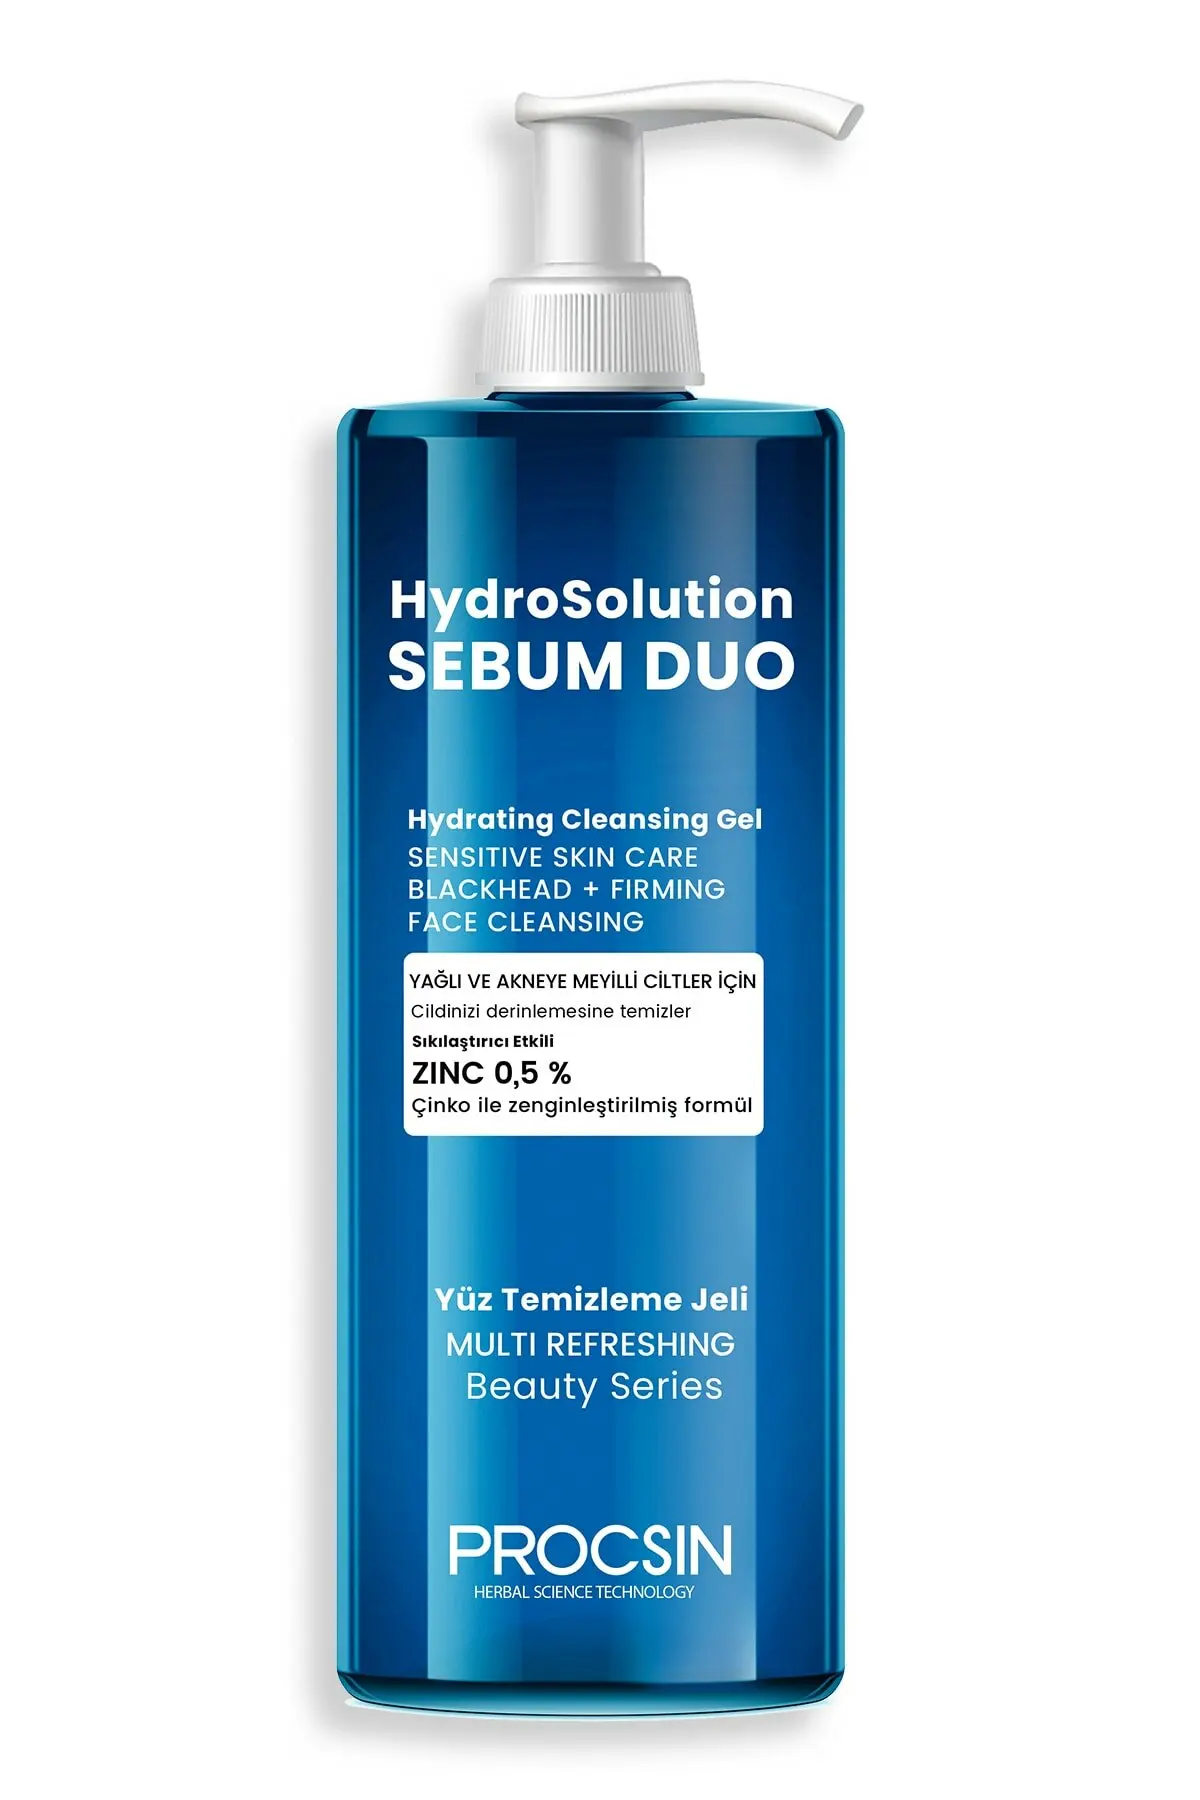 

Hydrosolution Face Cleansing Gel 400 Ml Cleans Your Skin And Detox Effect Wonderful Product Skin Care Supplies